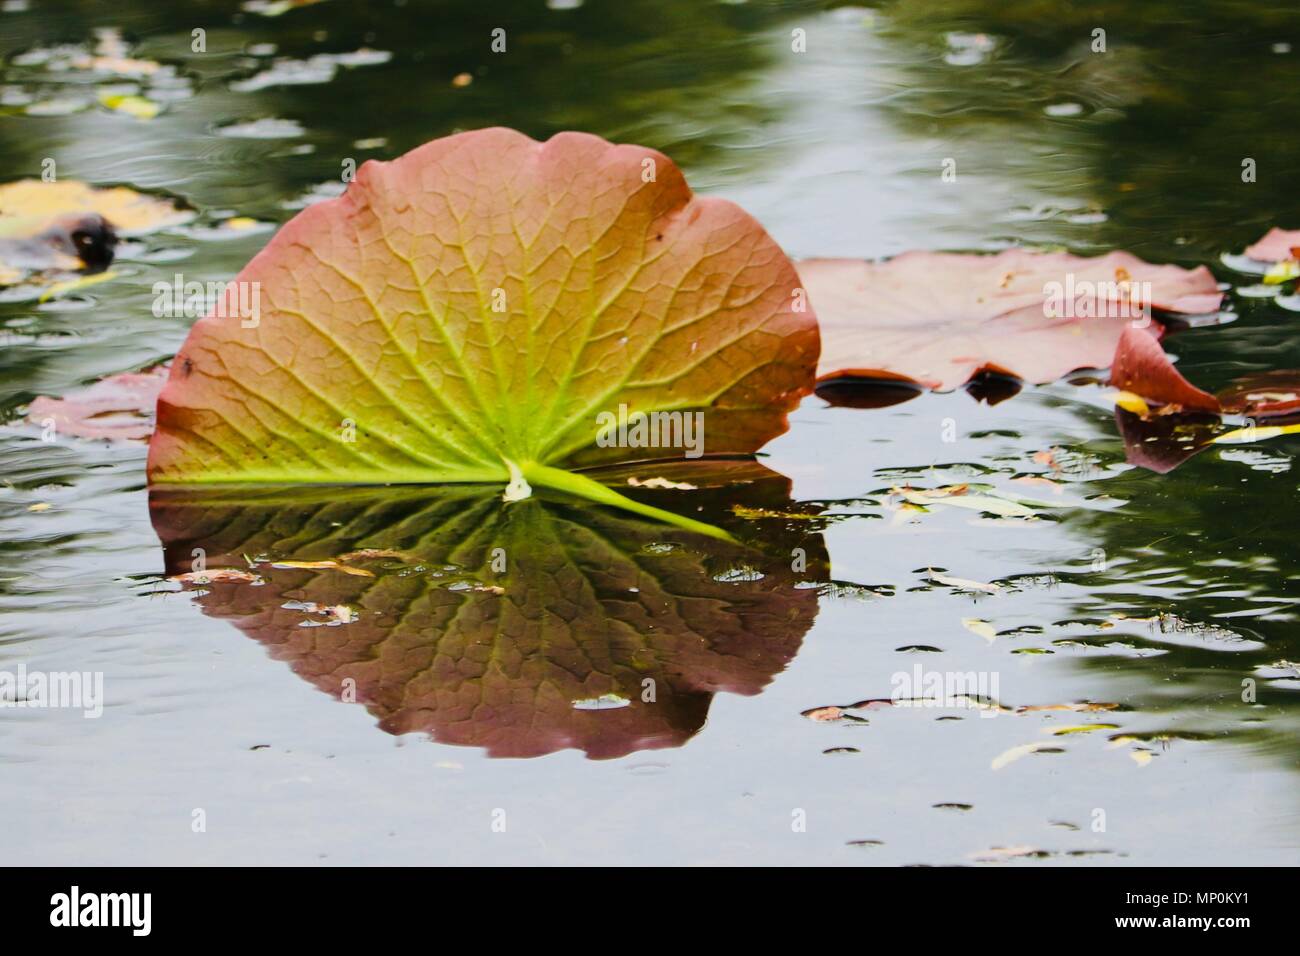 Water Lilly leafy floating On a lake in sunny weather the deep vines showing and reflecting on the water Stock Photo